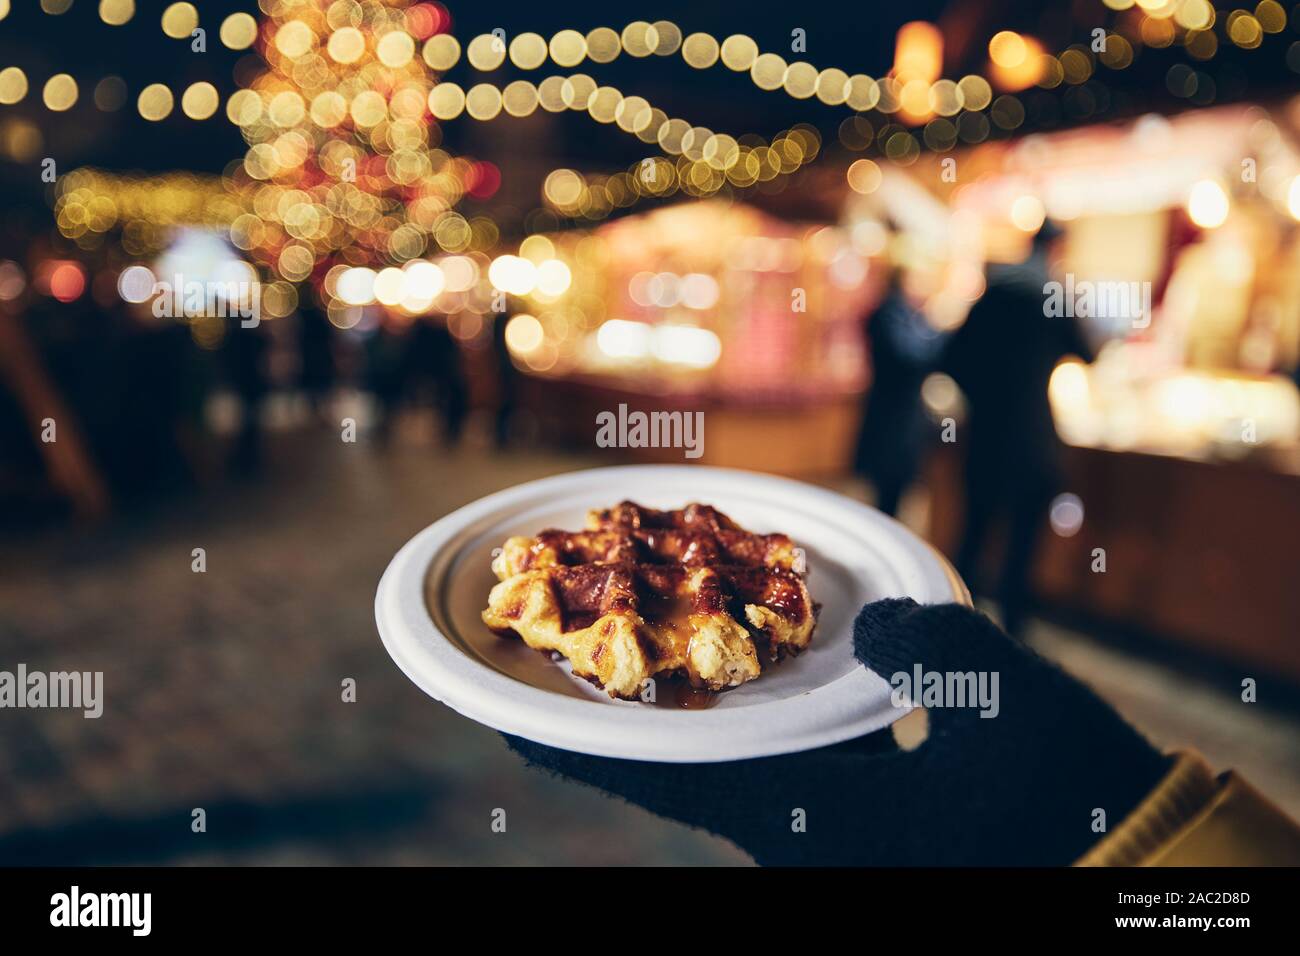 Hand in winter glove holding waffle with melted chocolate. Christmas market in Tallinn, Estonia. Stock Photo